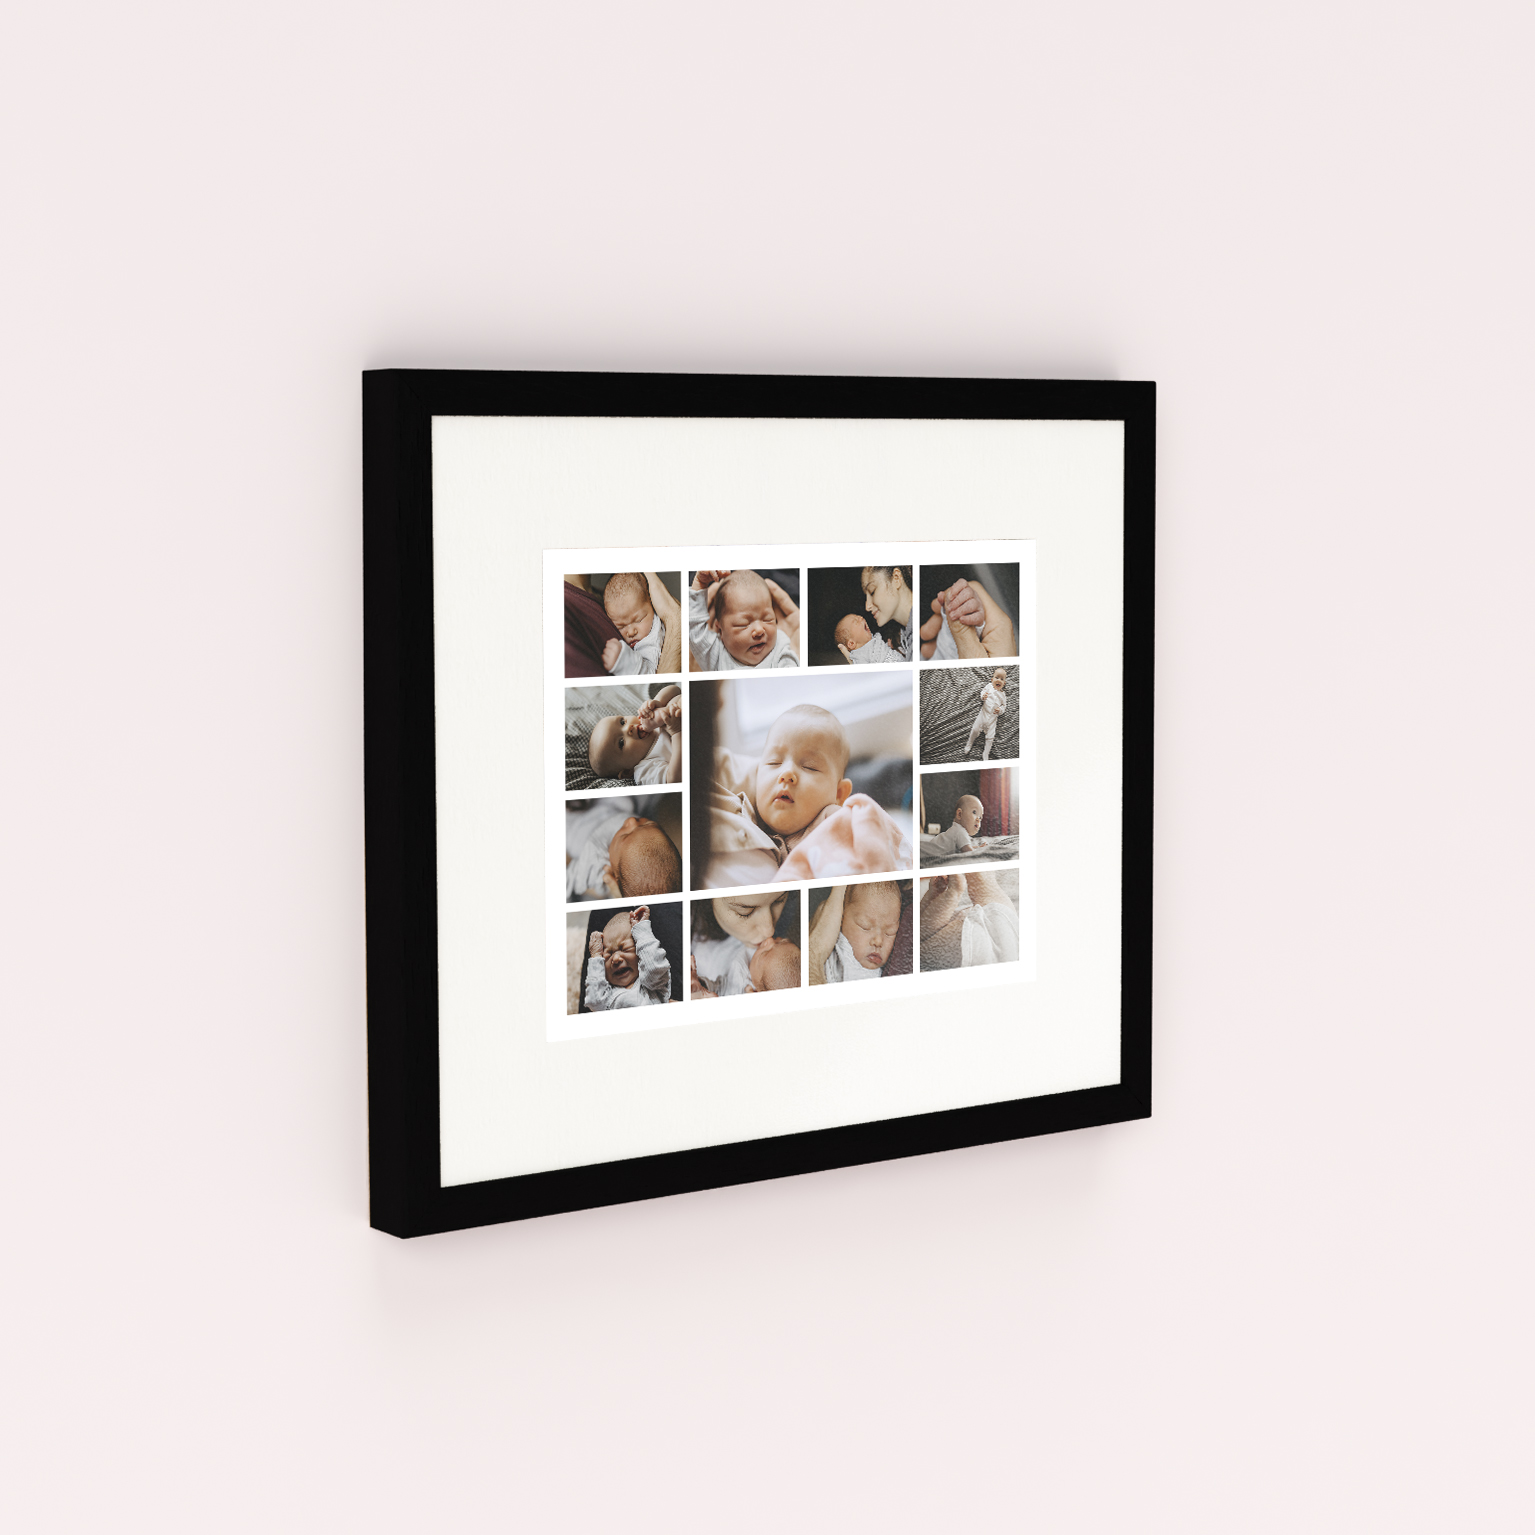 Life's Collage Framed Photo Prints - Introduce an elegant way to showcase 10+ cherished memories with these landscape-oriented framed prints. Add a modern and stylish touch to any space. Perfect for those with a collection of precious moments, celebrate and share your most treasured experiences with this unique decor.